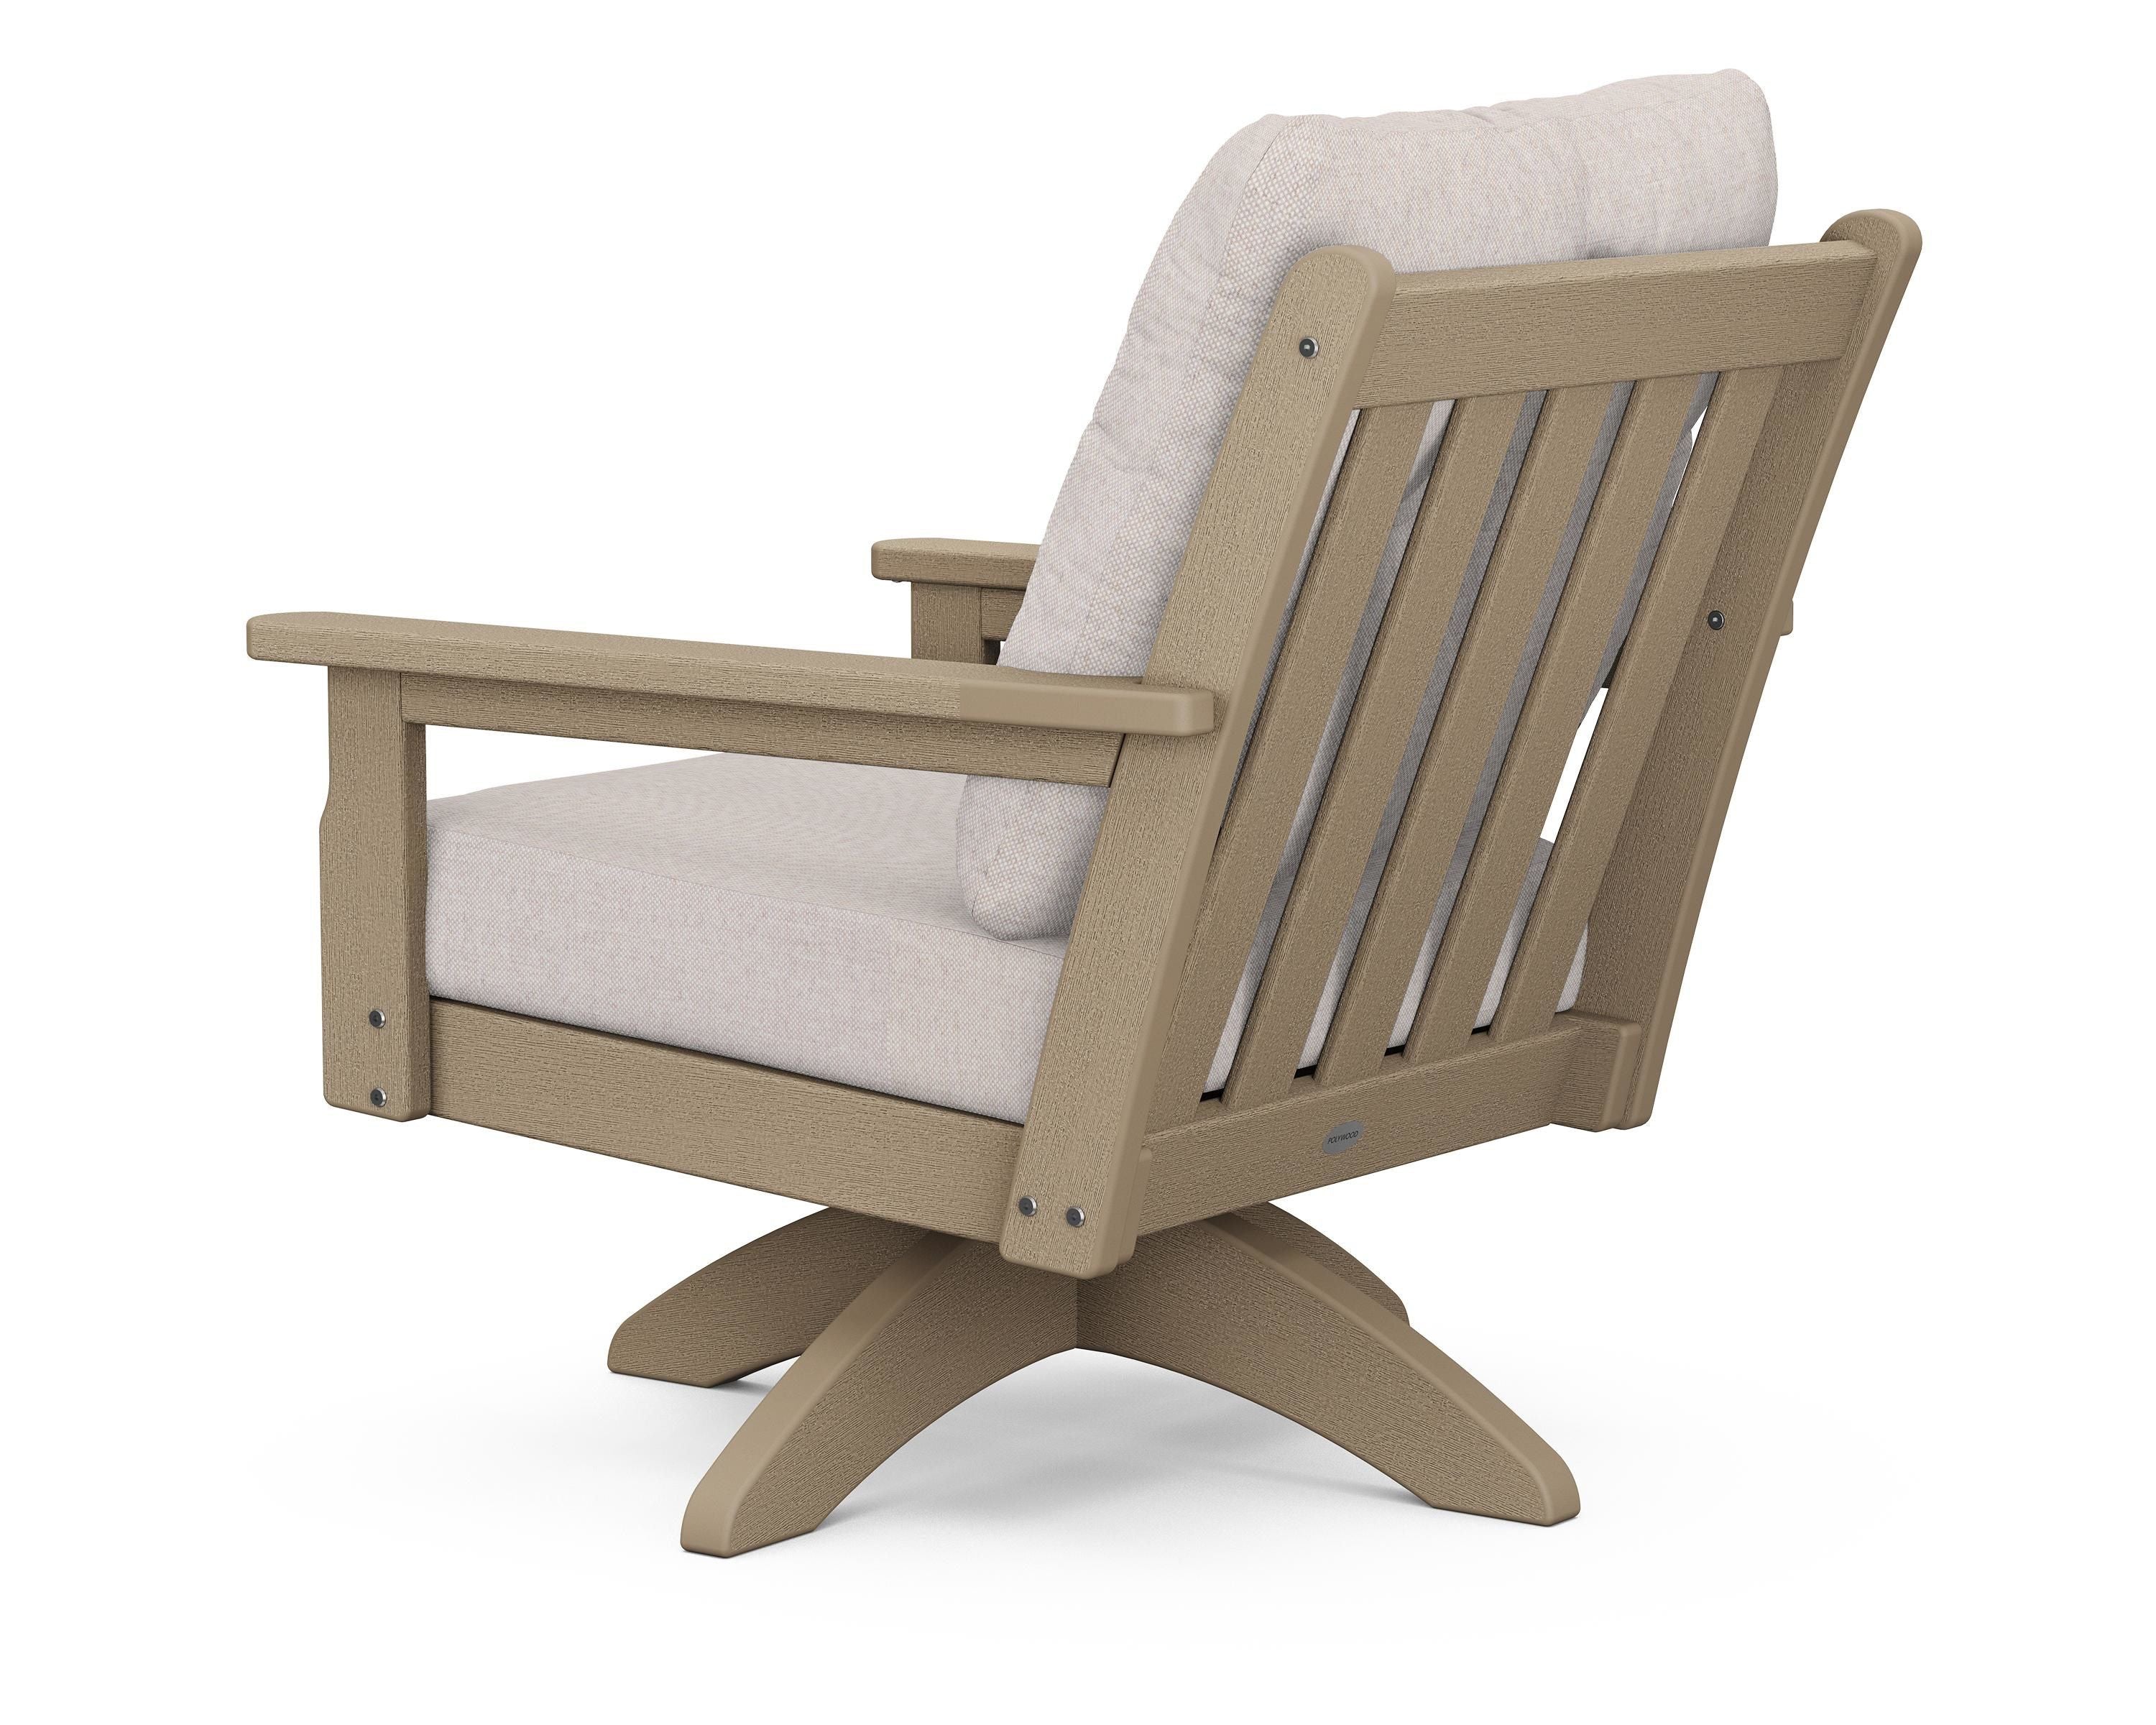 POLYWOOD Vineyard Deep Seating Swivel Chair in Vintage Sahara and Essential Sand Cushion Outdoor Chairs 12032901